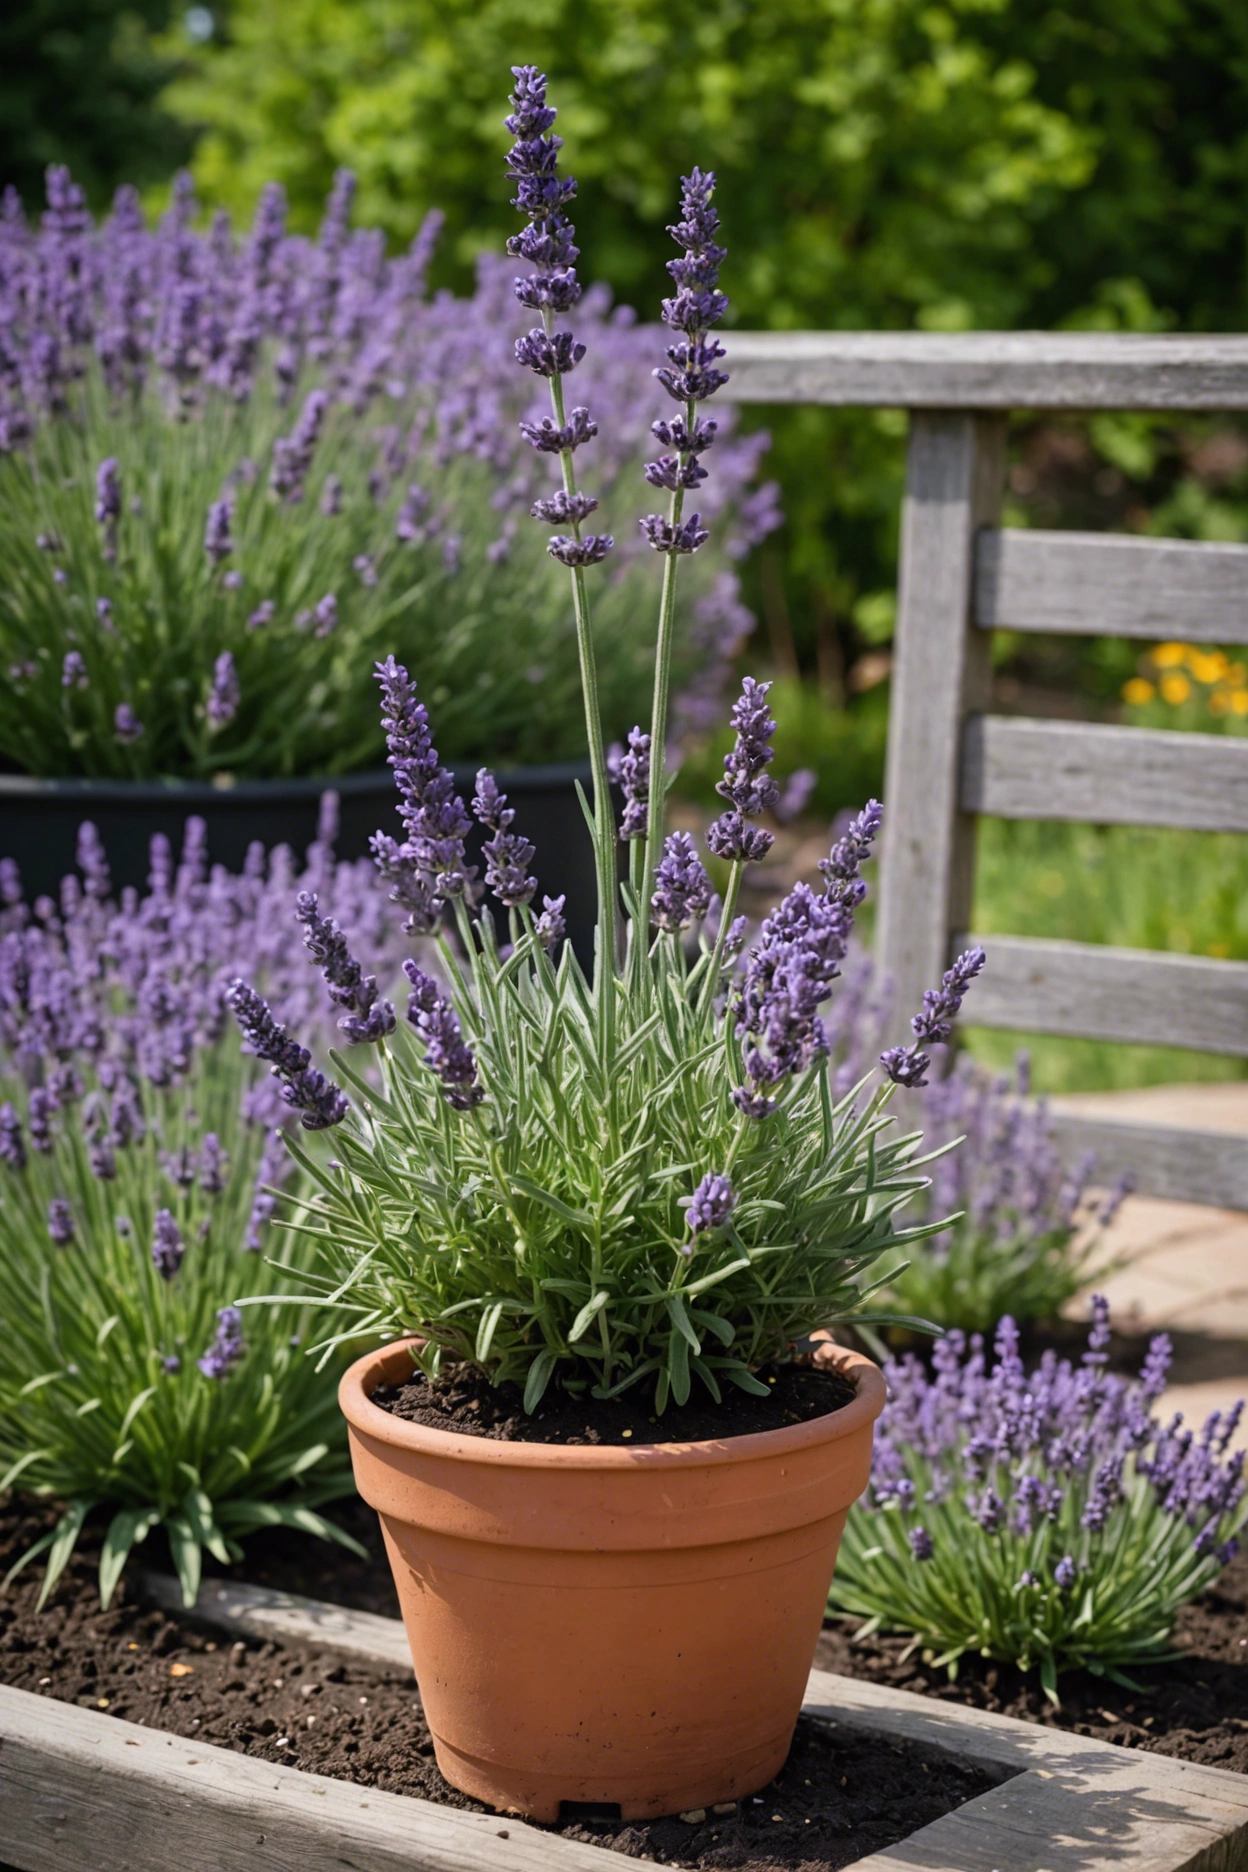 "A lavender plant struggling in a small pot, leaning with sparse blooms, surrounded by larger pots, soil and gardening tools."